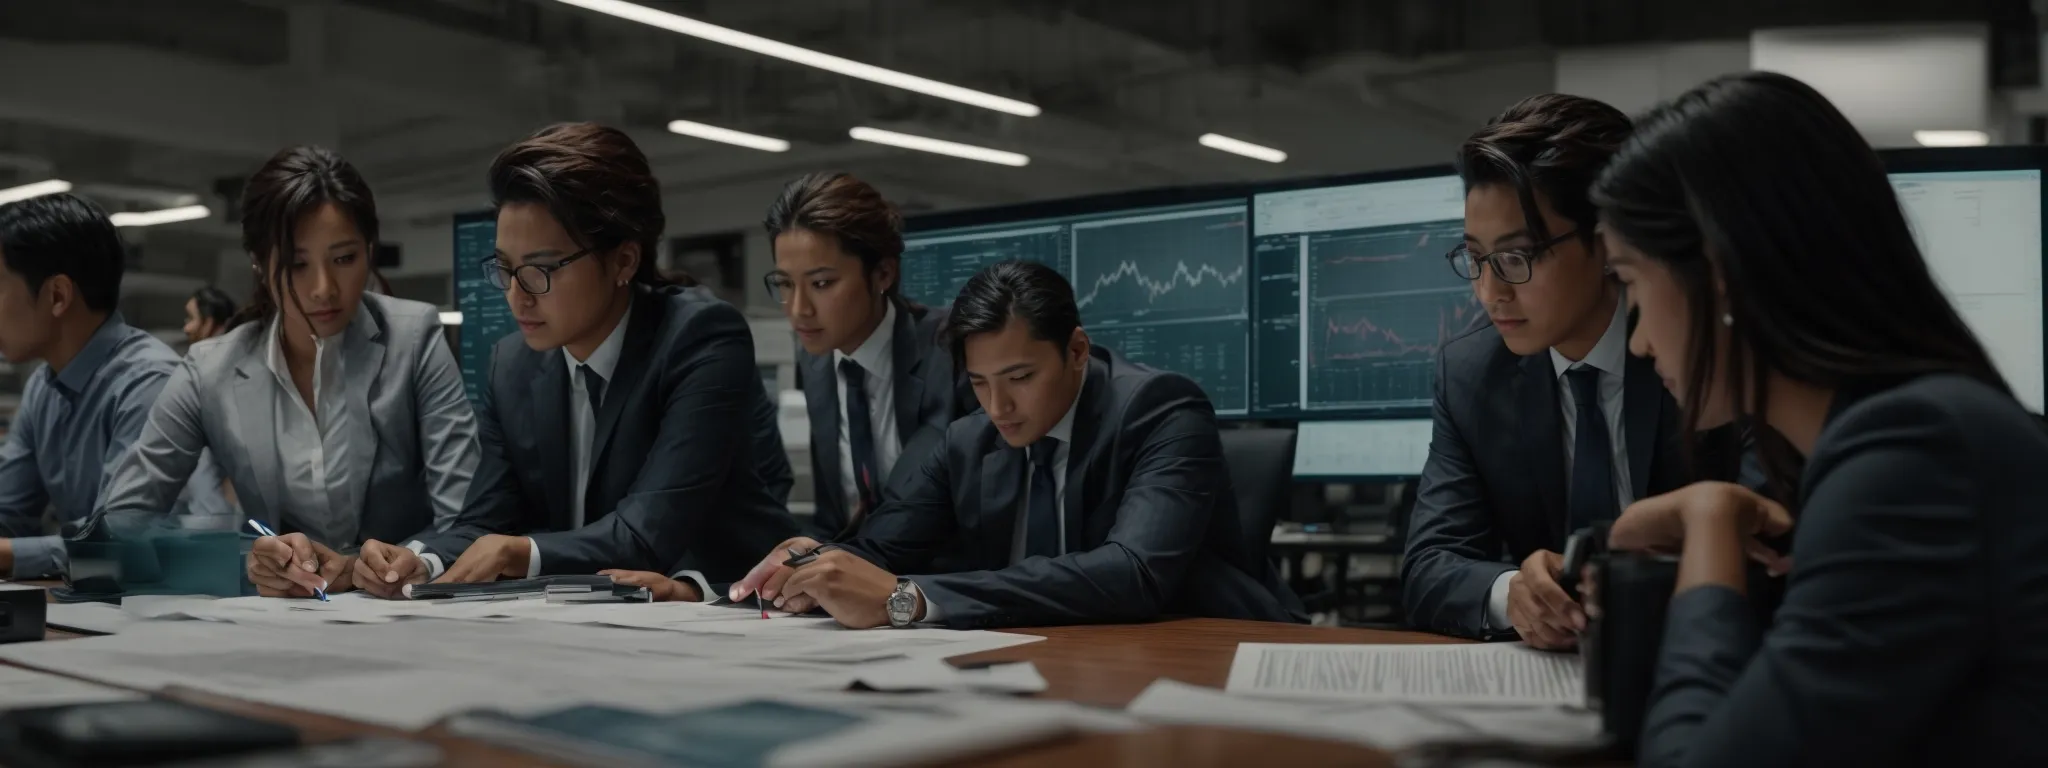 a group of professionals intently studying graphs and charts on a large monitor in a modern office.